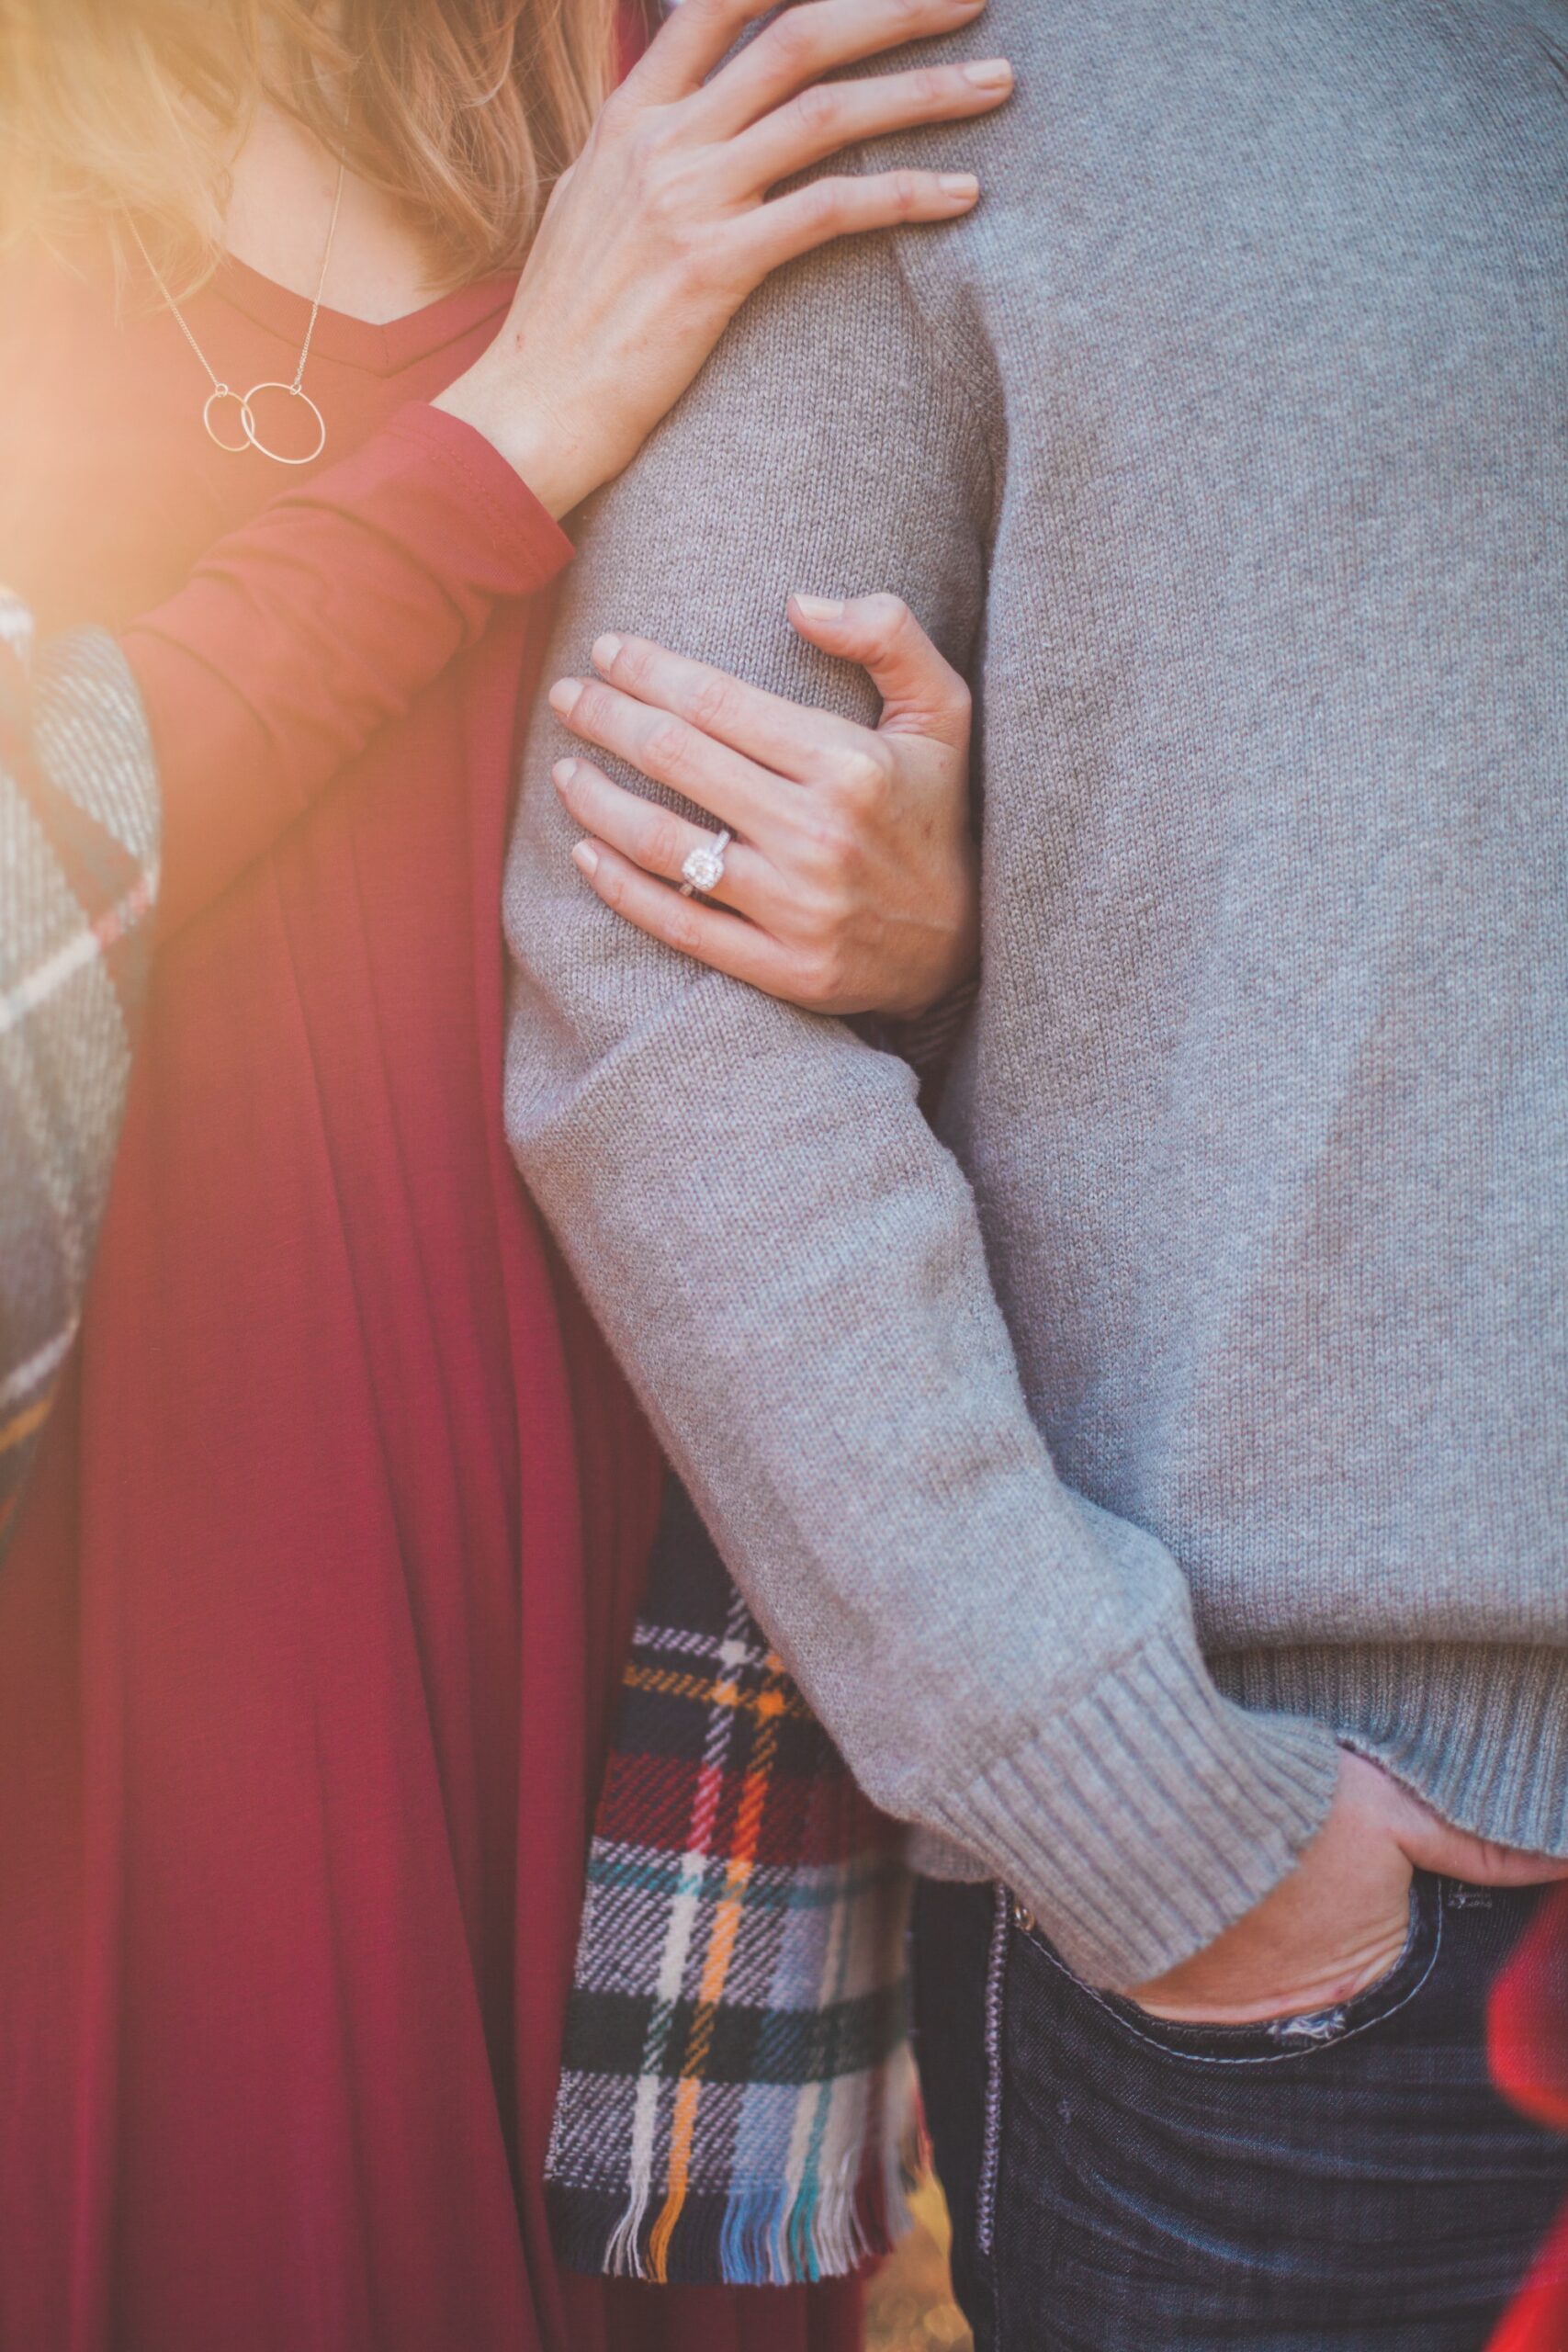 5 Easy Ways To Make Your Partner Feel Deeply Loved